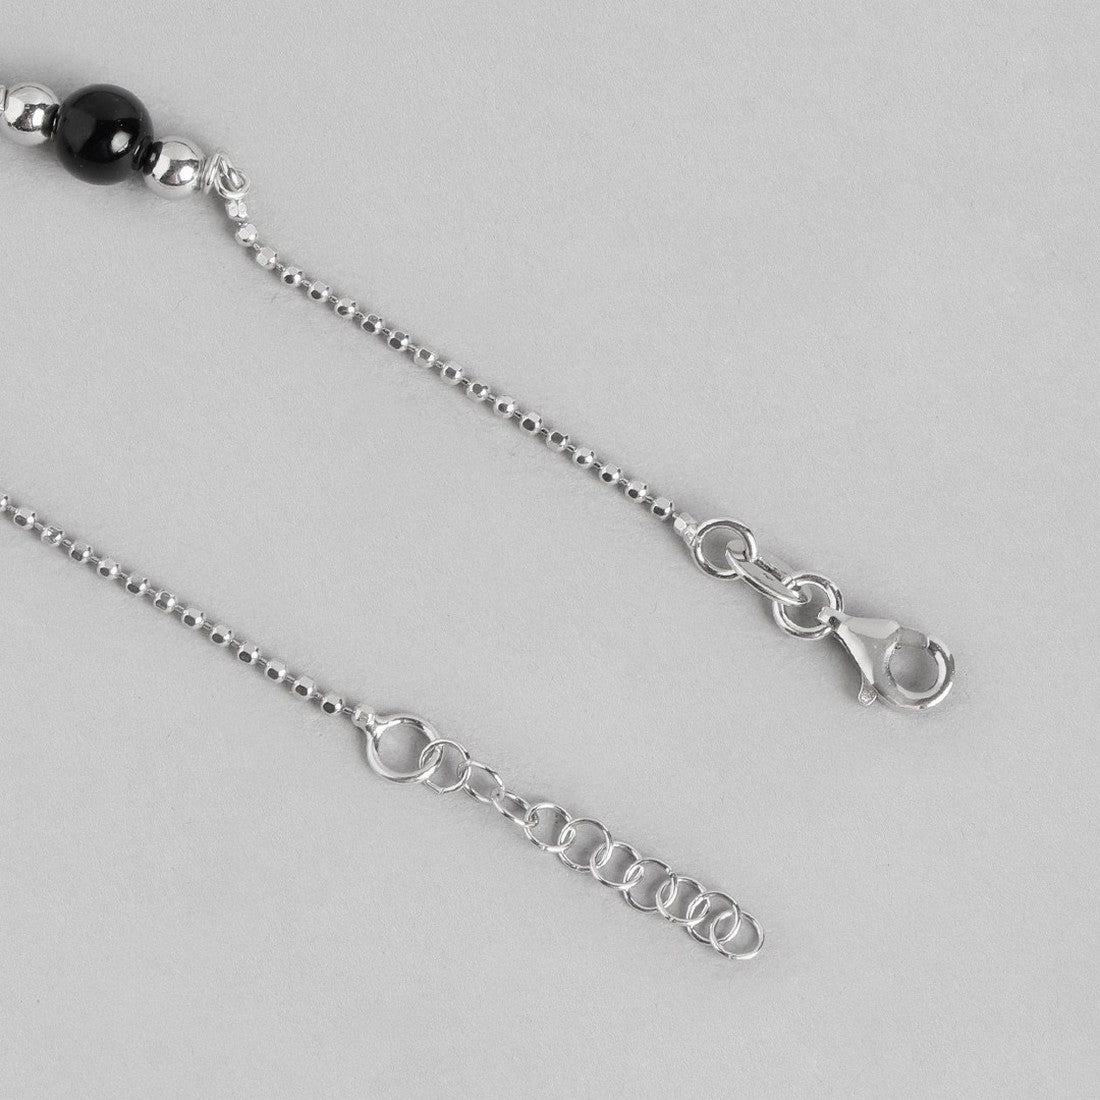 Black Pearl Rhodium Plated 925 Sterling Silver Chained Anklet